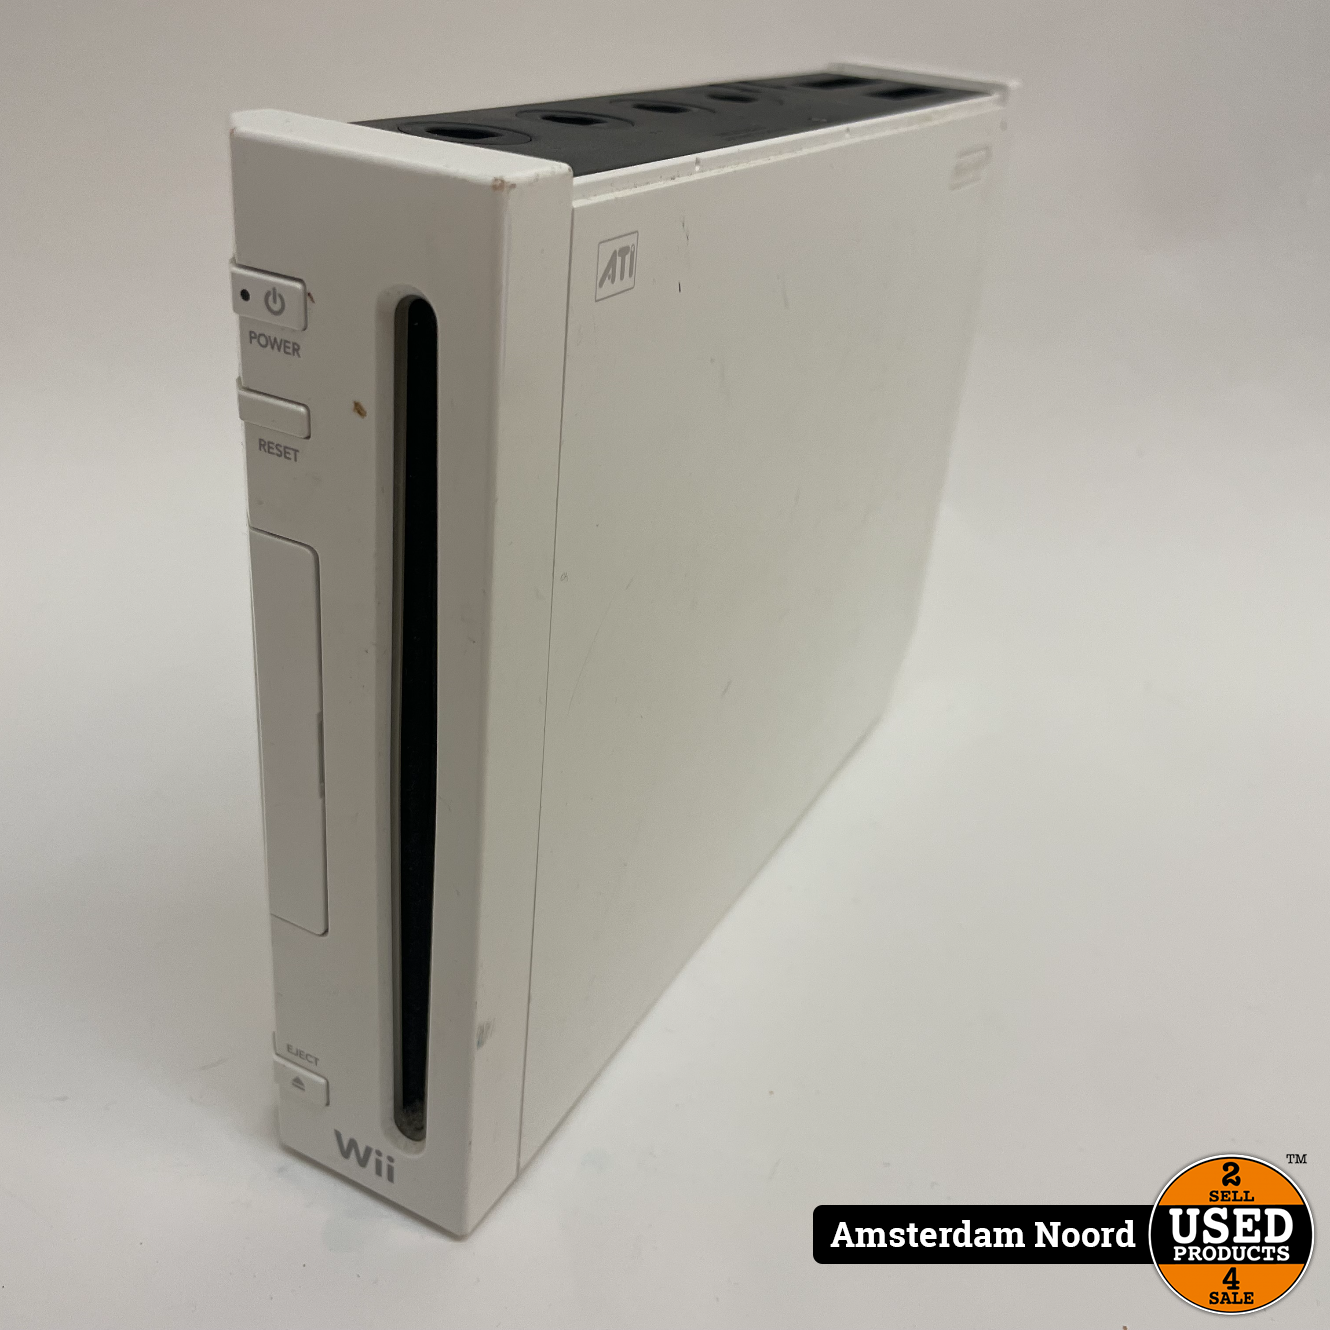 Nieuwheid mannetje Handschrift Nintendo Wii Console - Used Products Amsterdam Noord